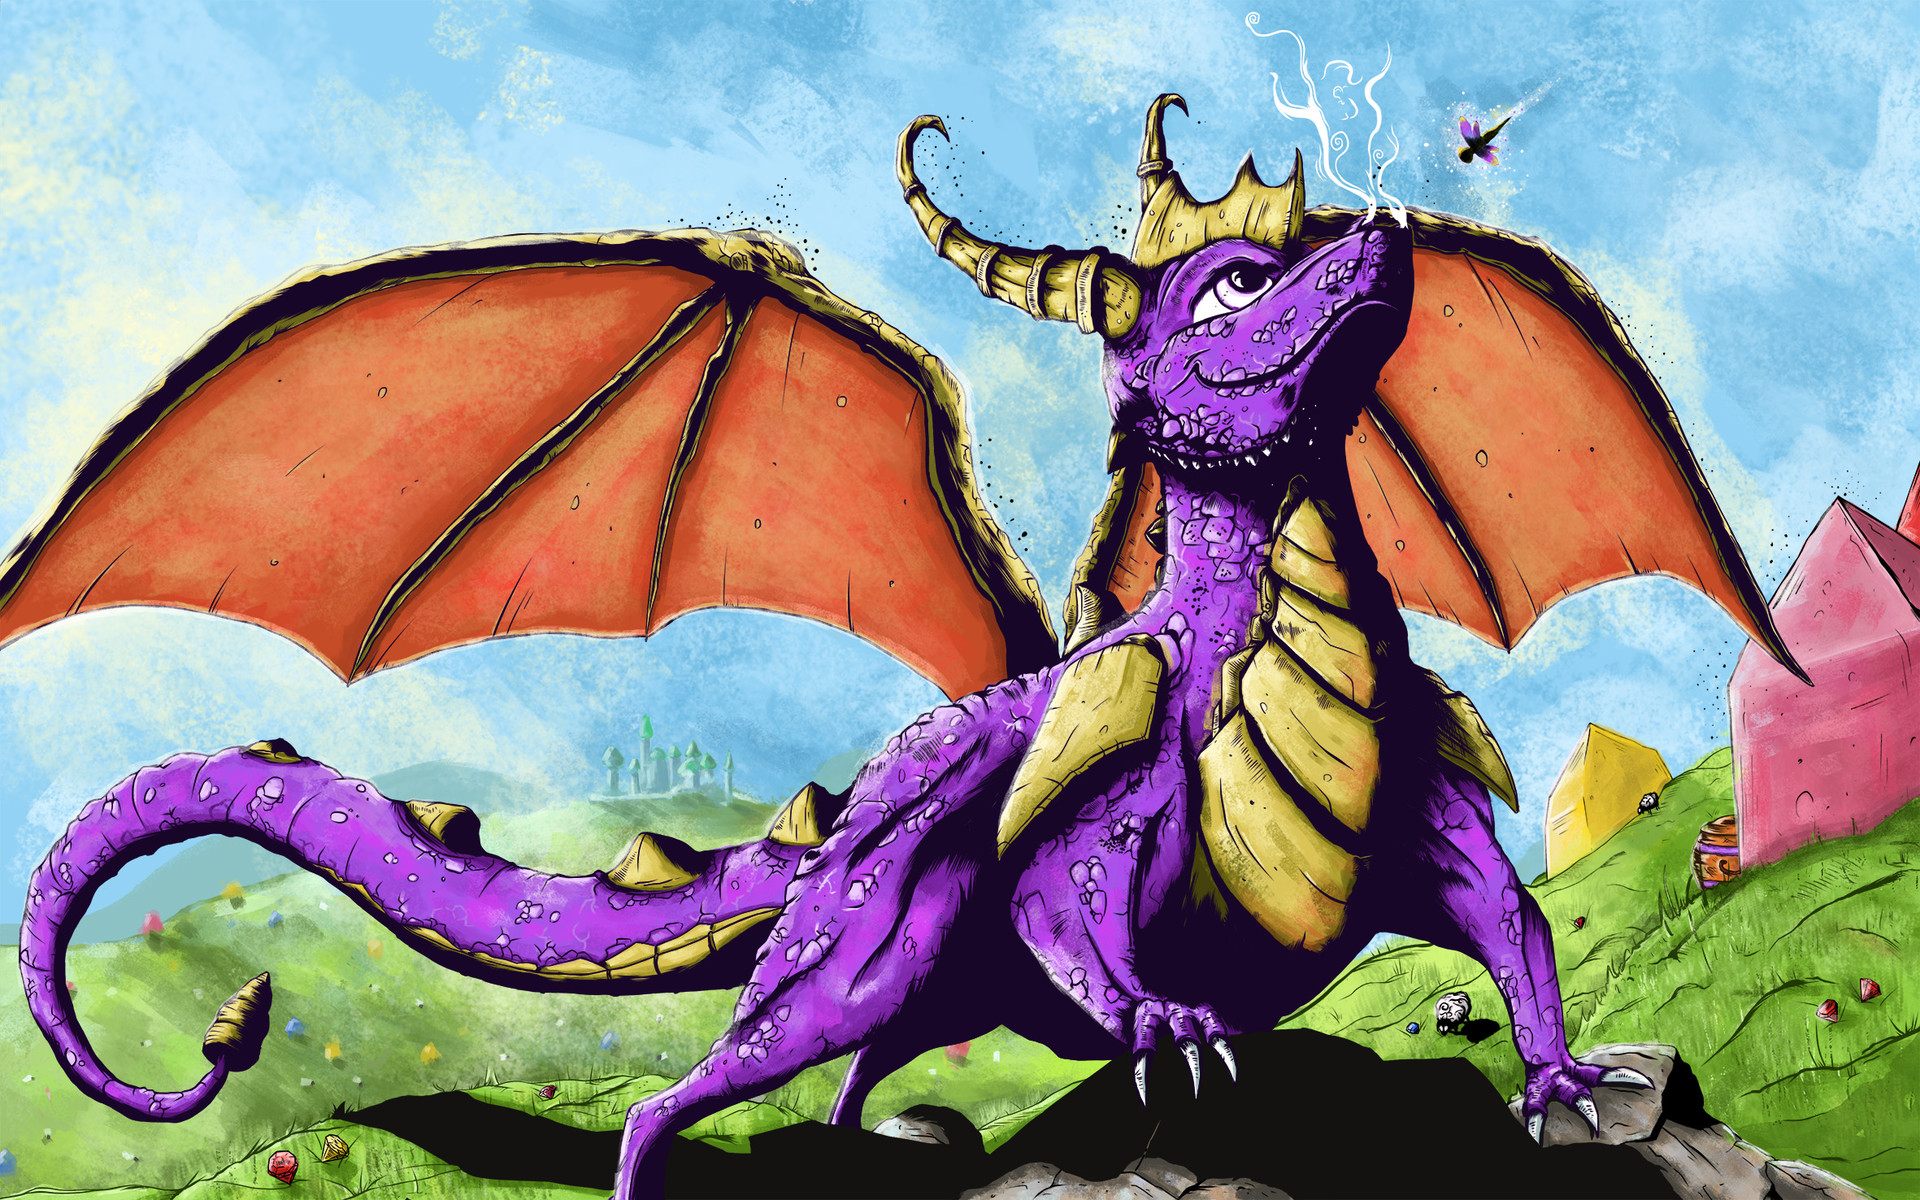 Fan art of the game character, Spyro The Dragon and I decided to illustrate...